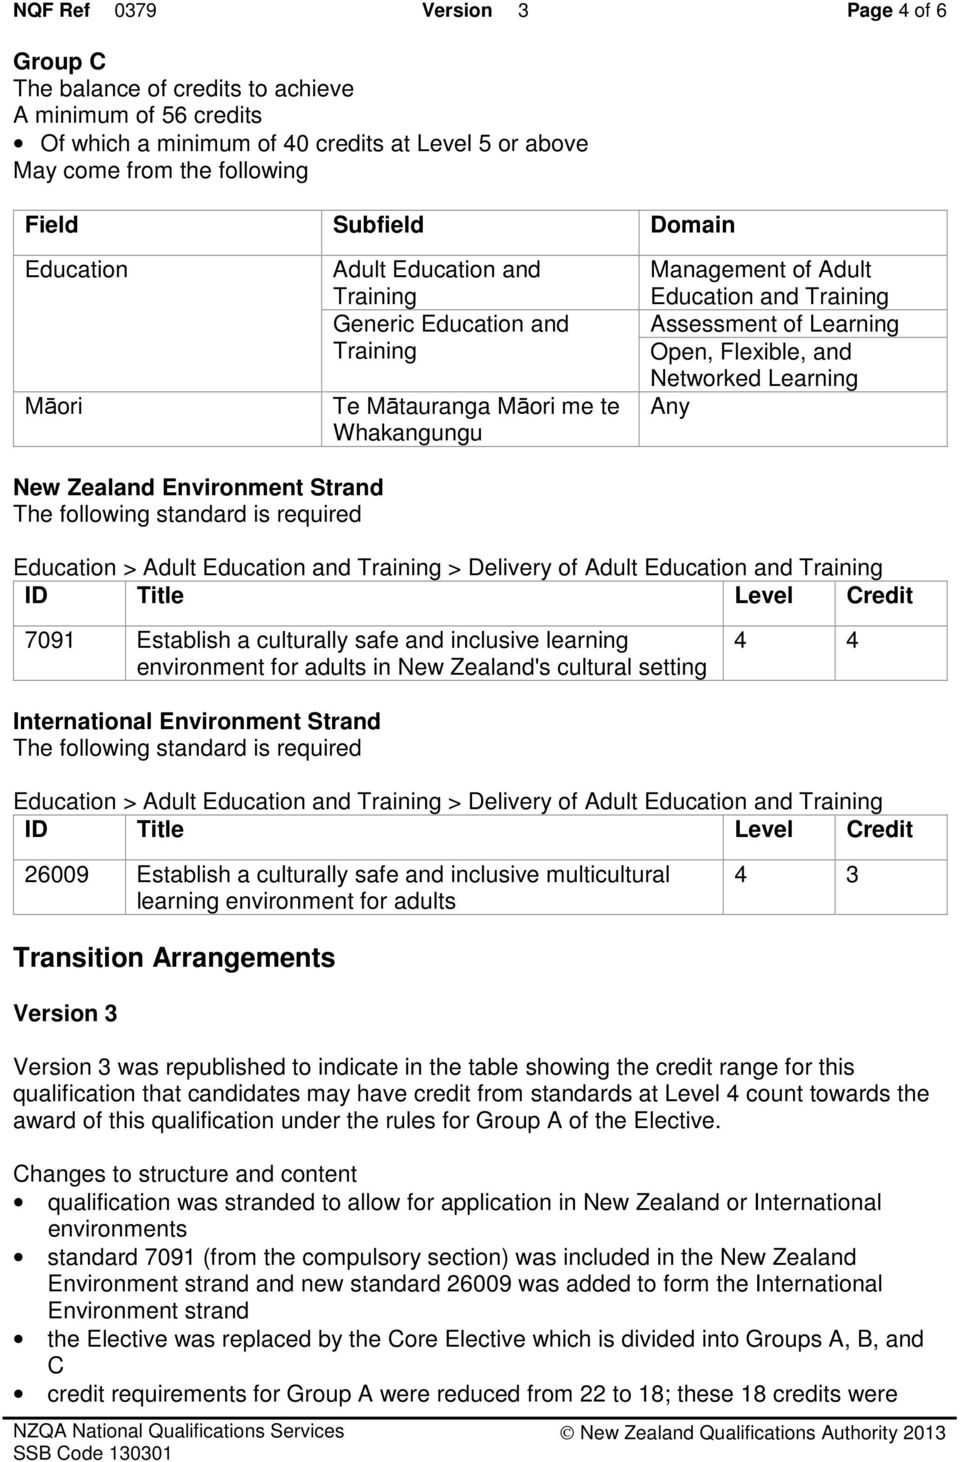 Delivery of ID Title Level Credit 7091 Establish a culturally safe and inclusive learning environment for adults in New Zealand's cultural setting 4 4 International Environment Strand The following